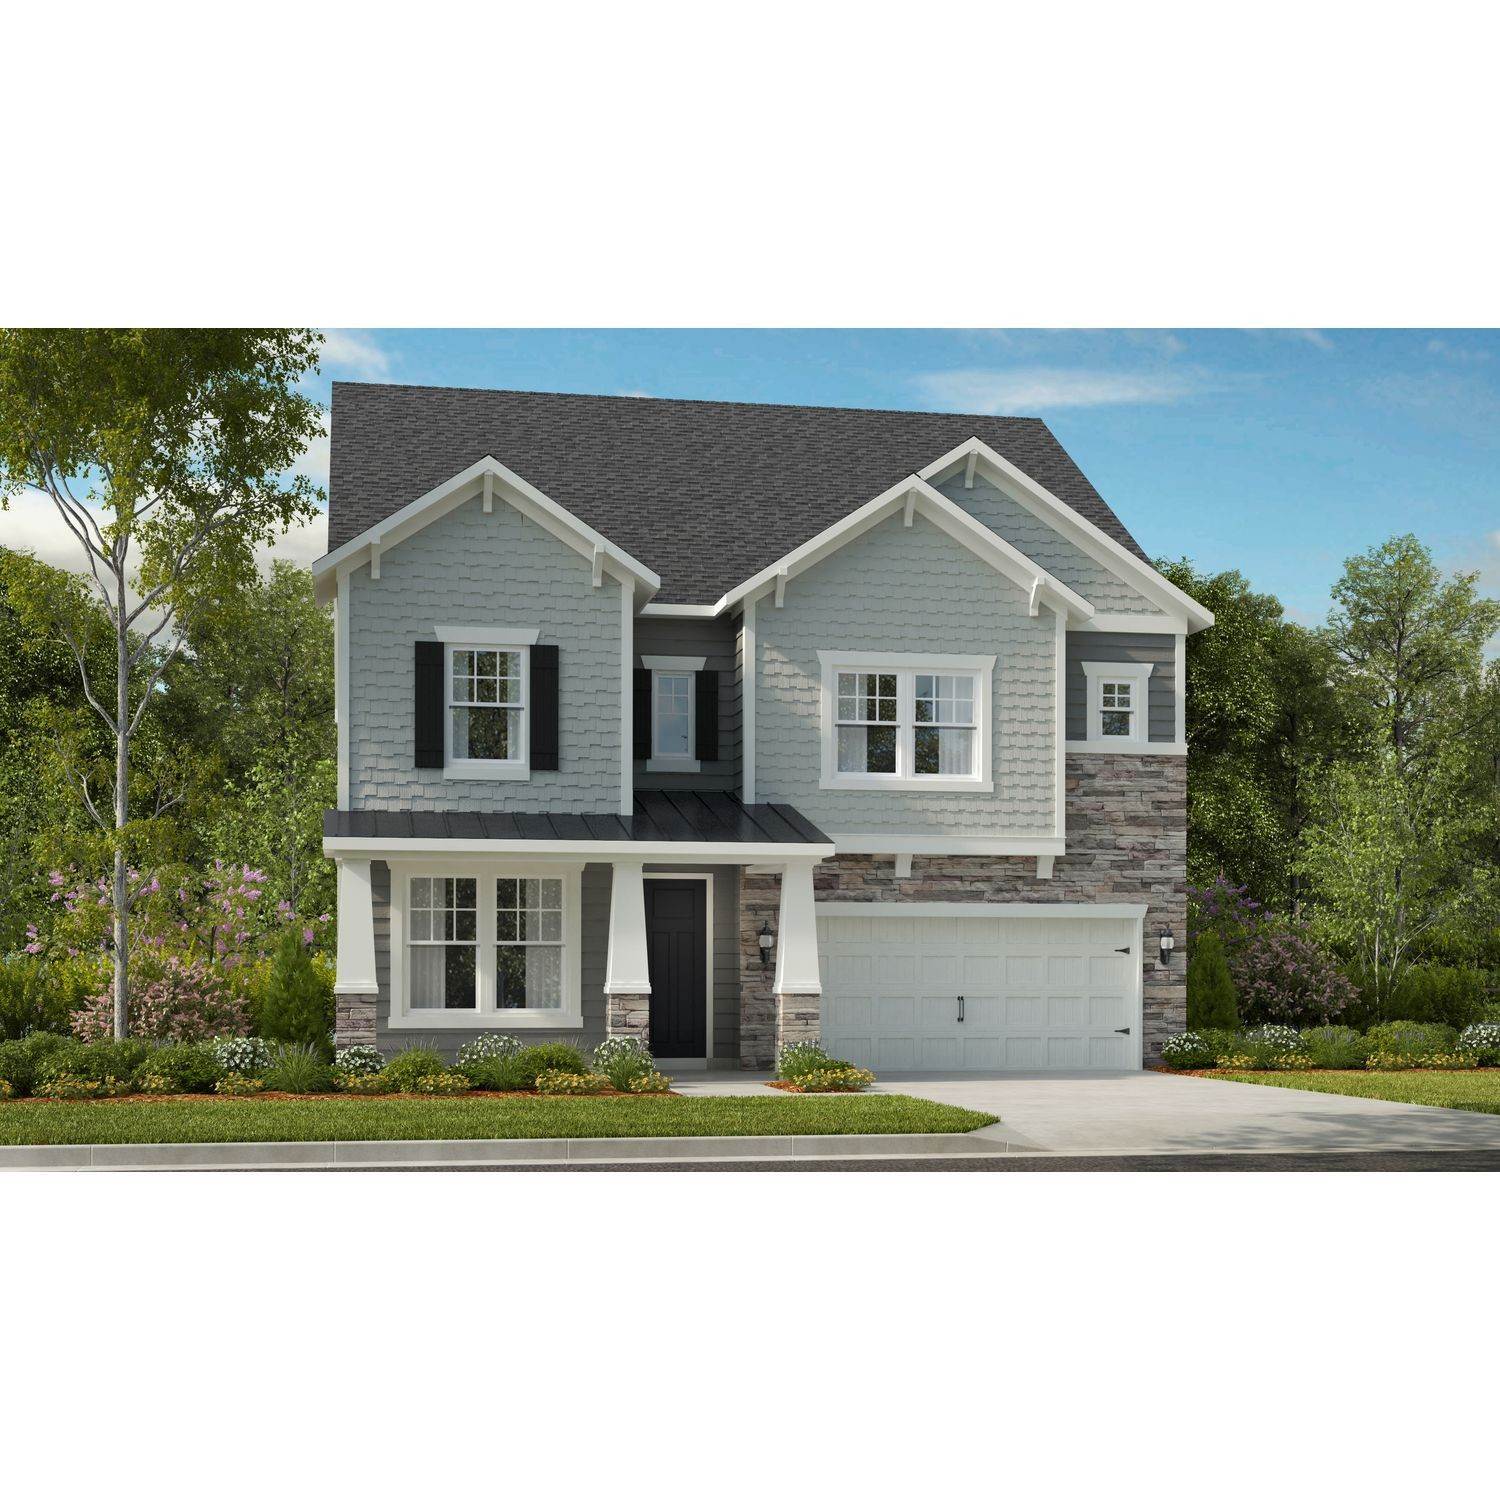 Single Family for Sale at Mooresville, NC 28117